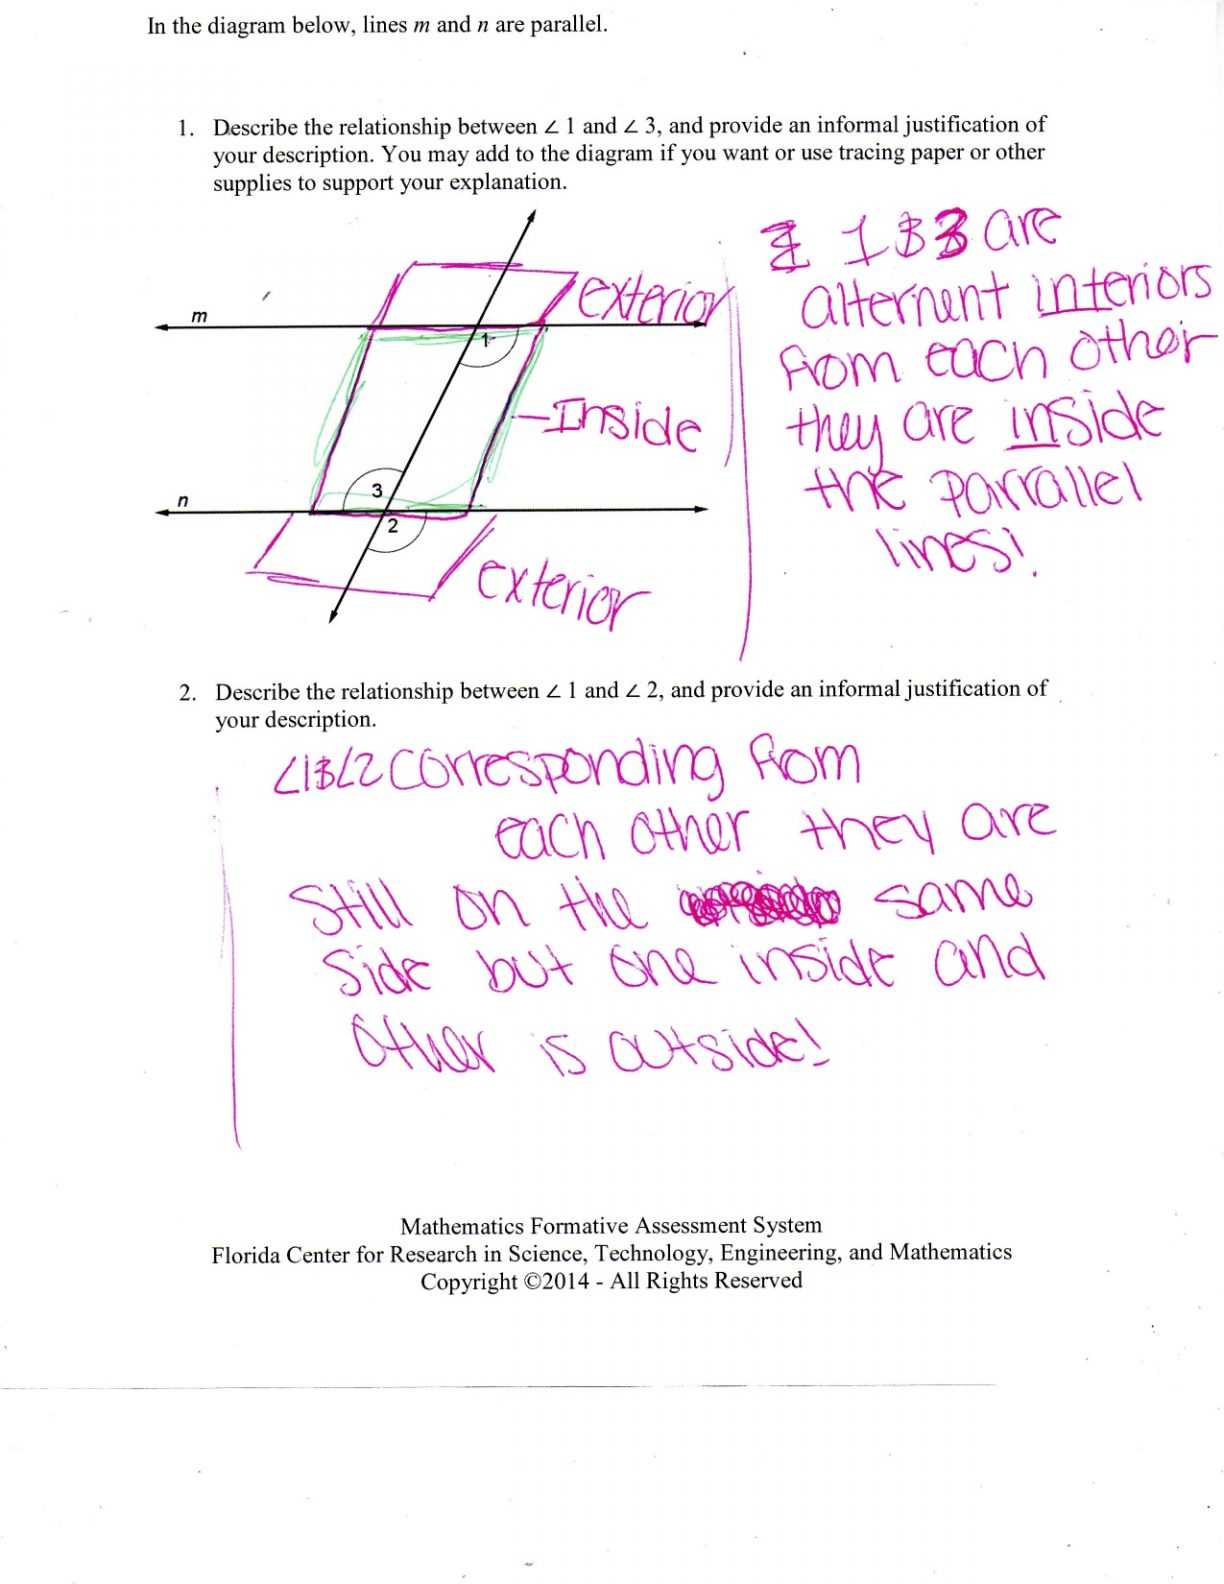 Angle Pair Relationships Worksheet Answers with Between the Lines Worksheet Answers Image Collections Worksheet